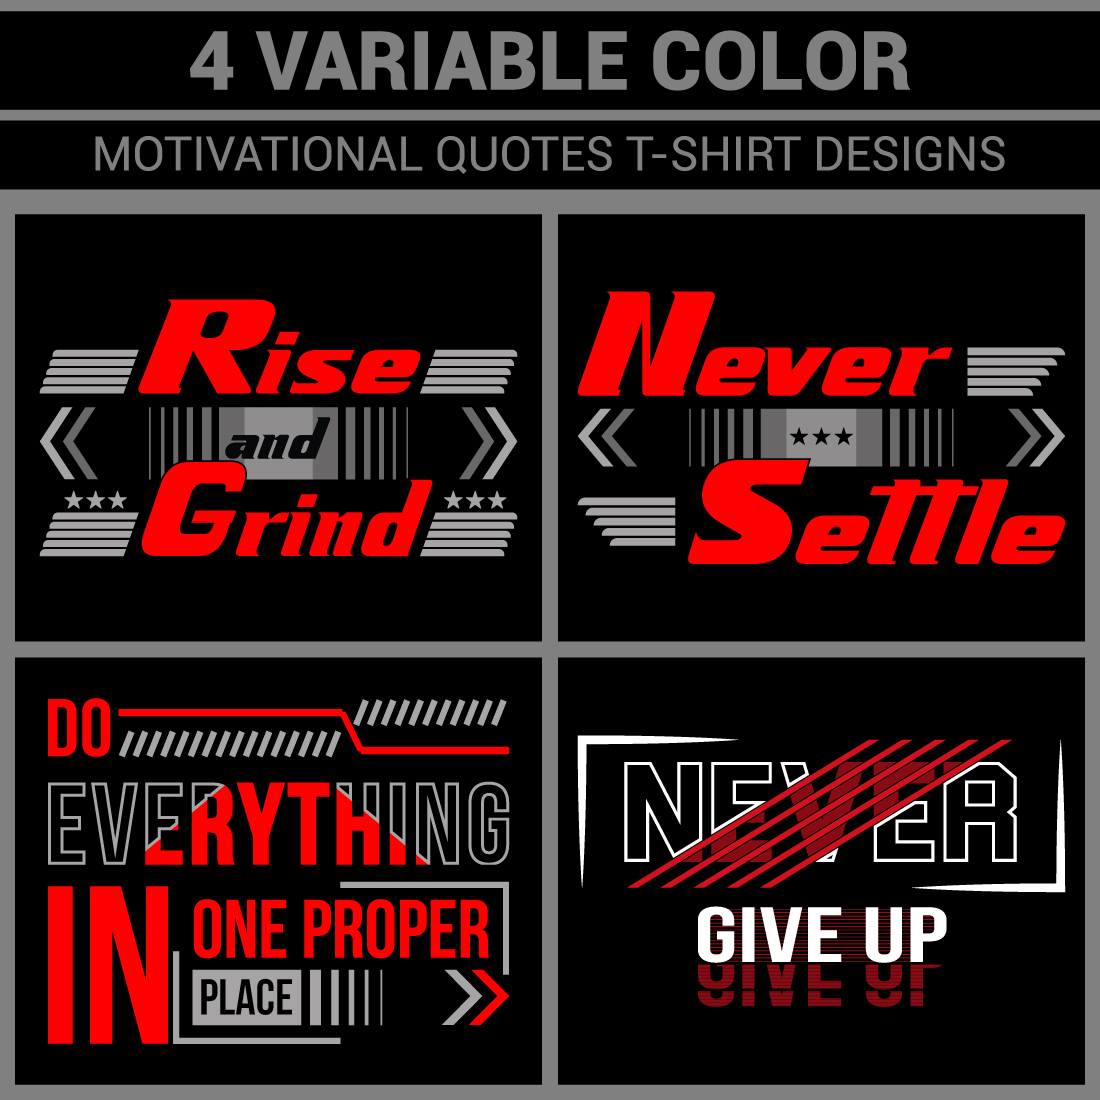 4 Variable Color Motivational quotes T-Shirt Designs cover image.